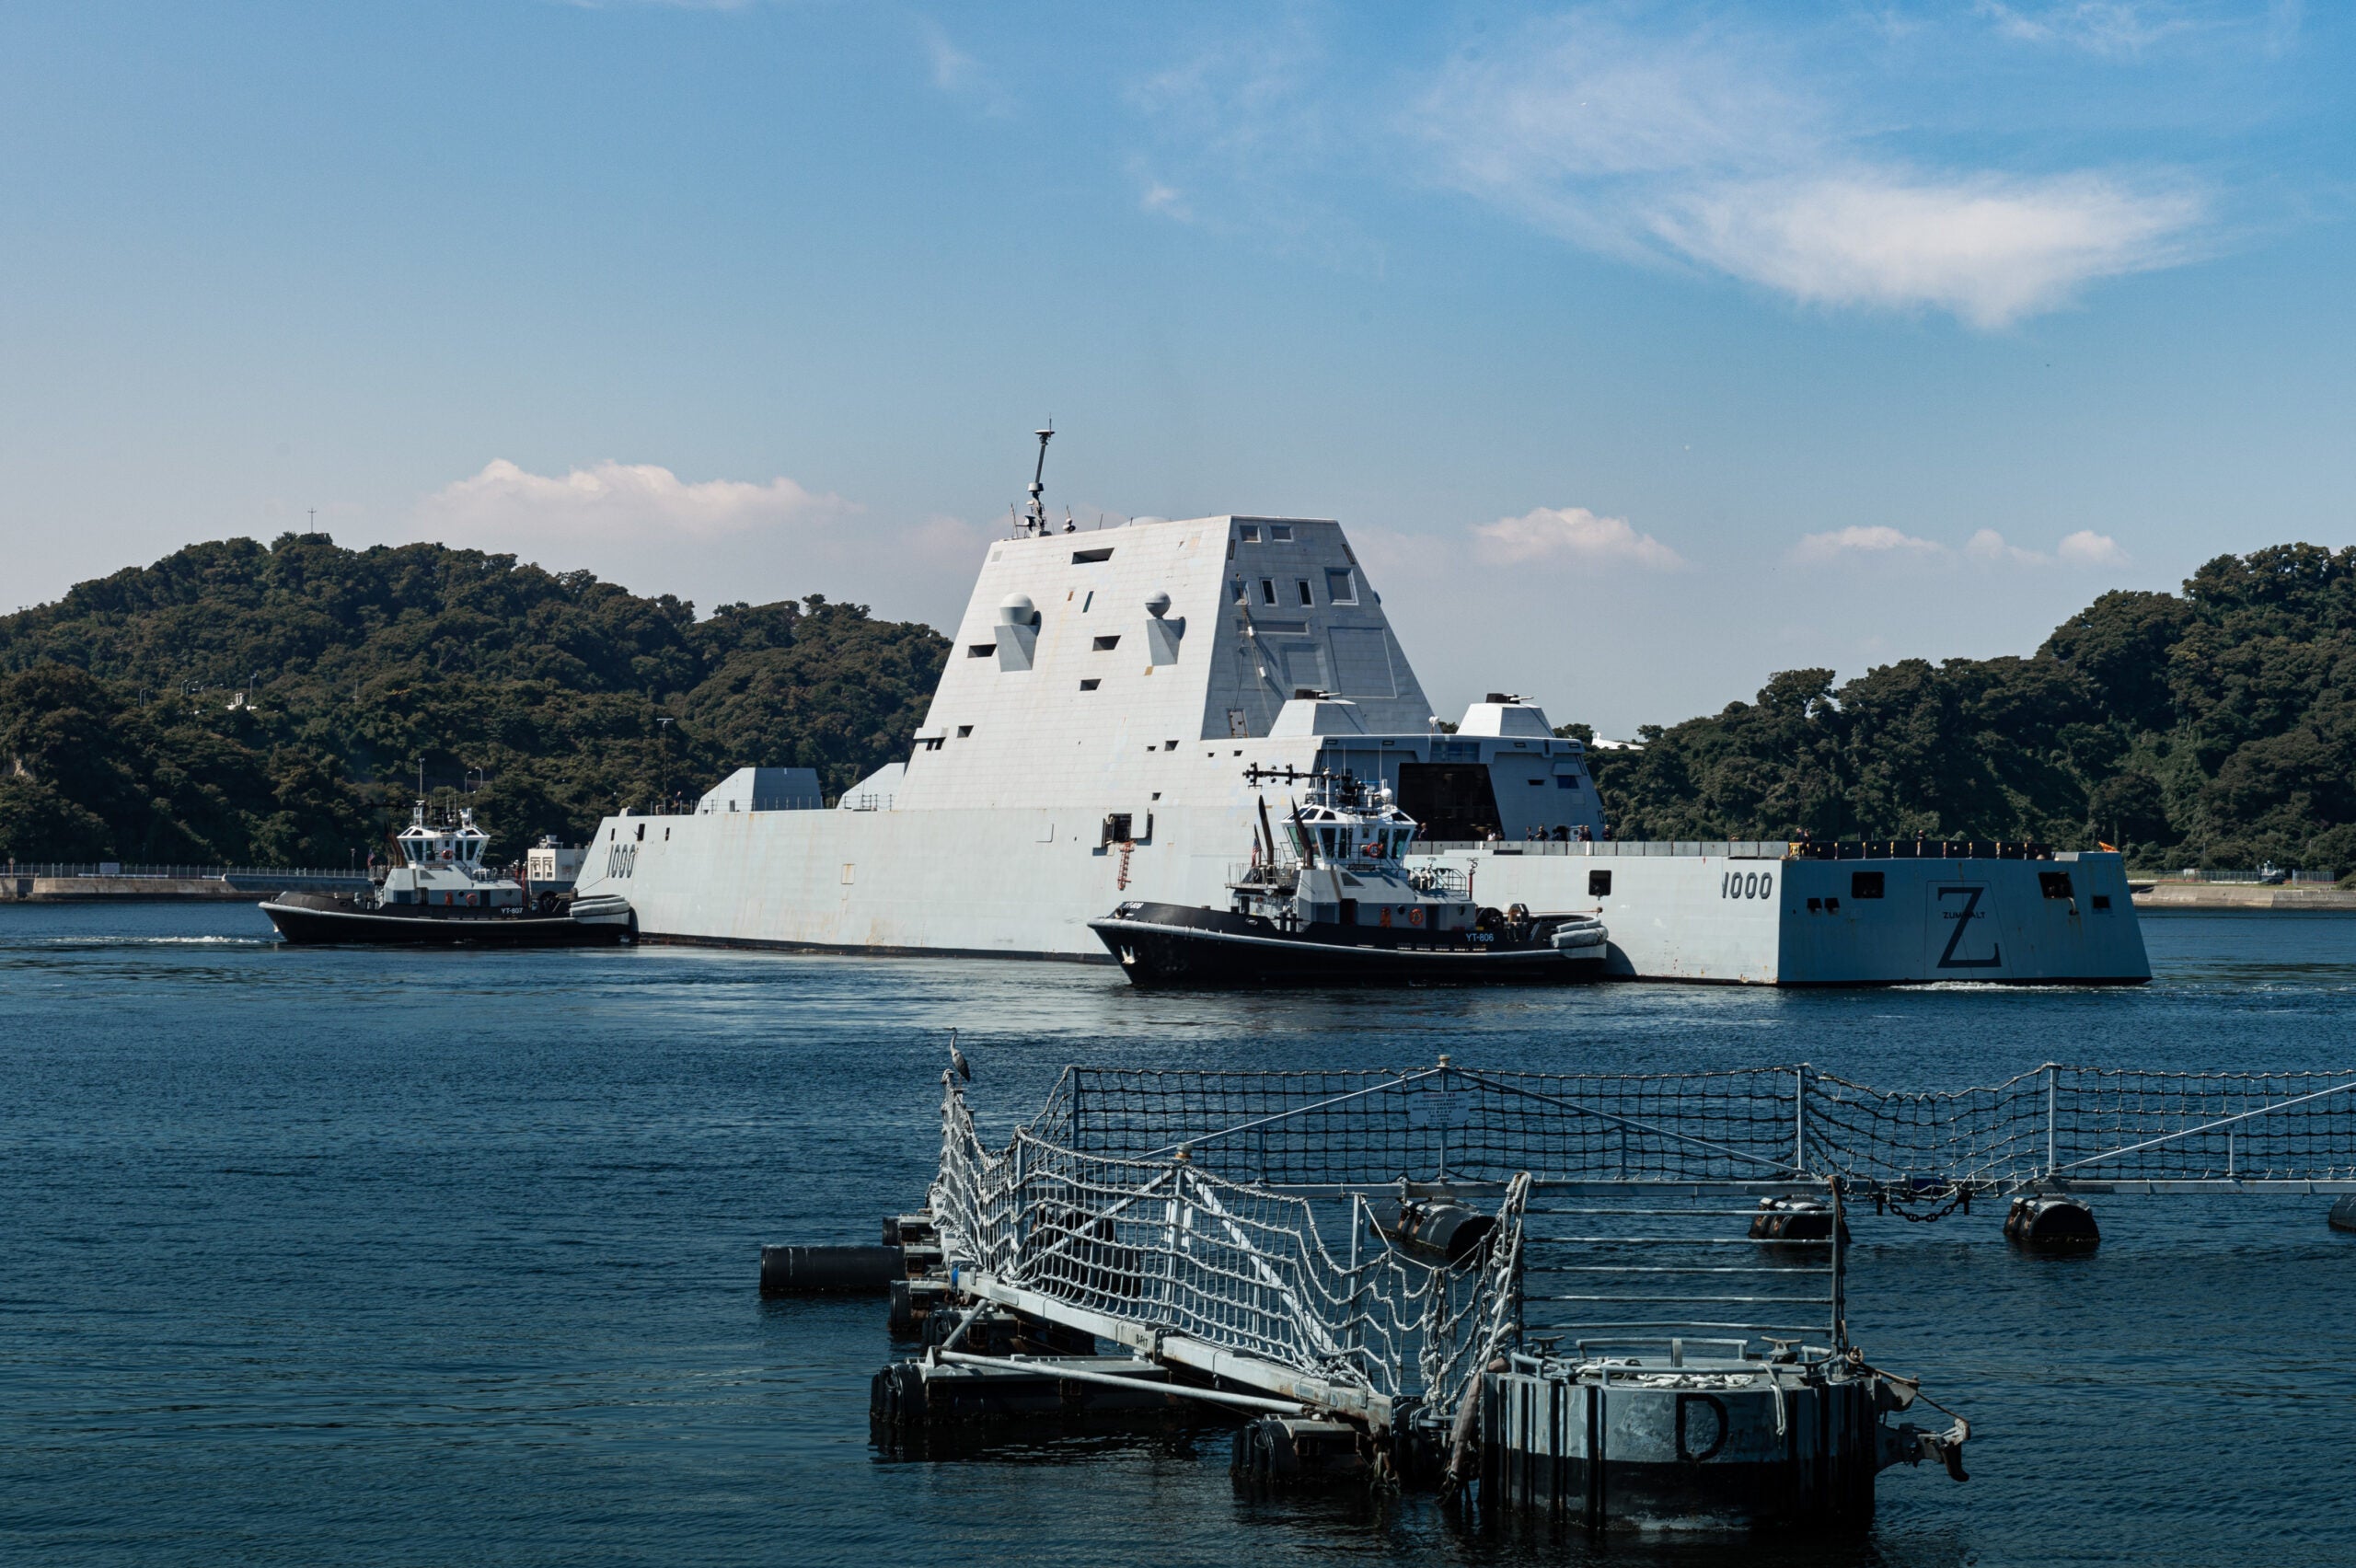 YOKOSUKA, Japan (Sept. 26, 2022) The Valiant-class harbor tugs Puyallup (YT-806) and Menominee (YT-807), assigned to Commander, Fleet Activities Yokosuka (CFAY), escort the Zumwalt-class guided-missile destroyer USS Zumwalt (DDG 1000) to a berth at CFAY for a scheduled port visit. For more than 75 years, CFAY has provided, maintained, and operated base facilities and services in support of the U.S. 7th Fleet's forward deployed naval forces, tenant commands, and thousands of military and civilian personnel and their families. (U.S Navy photo by Seaman Darren Cordoviz)